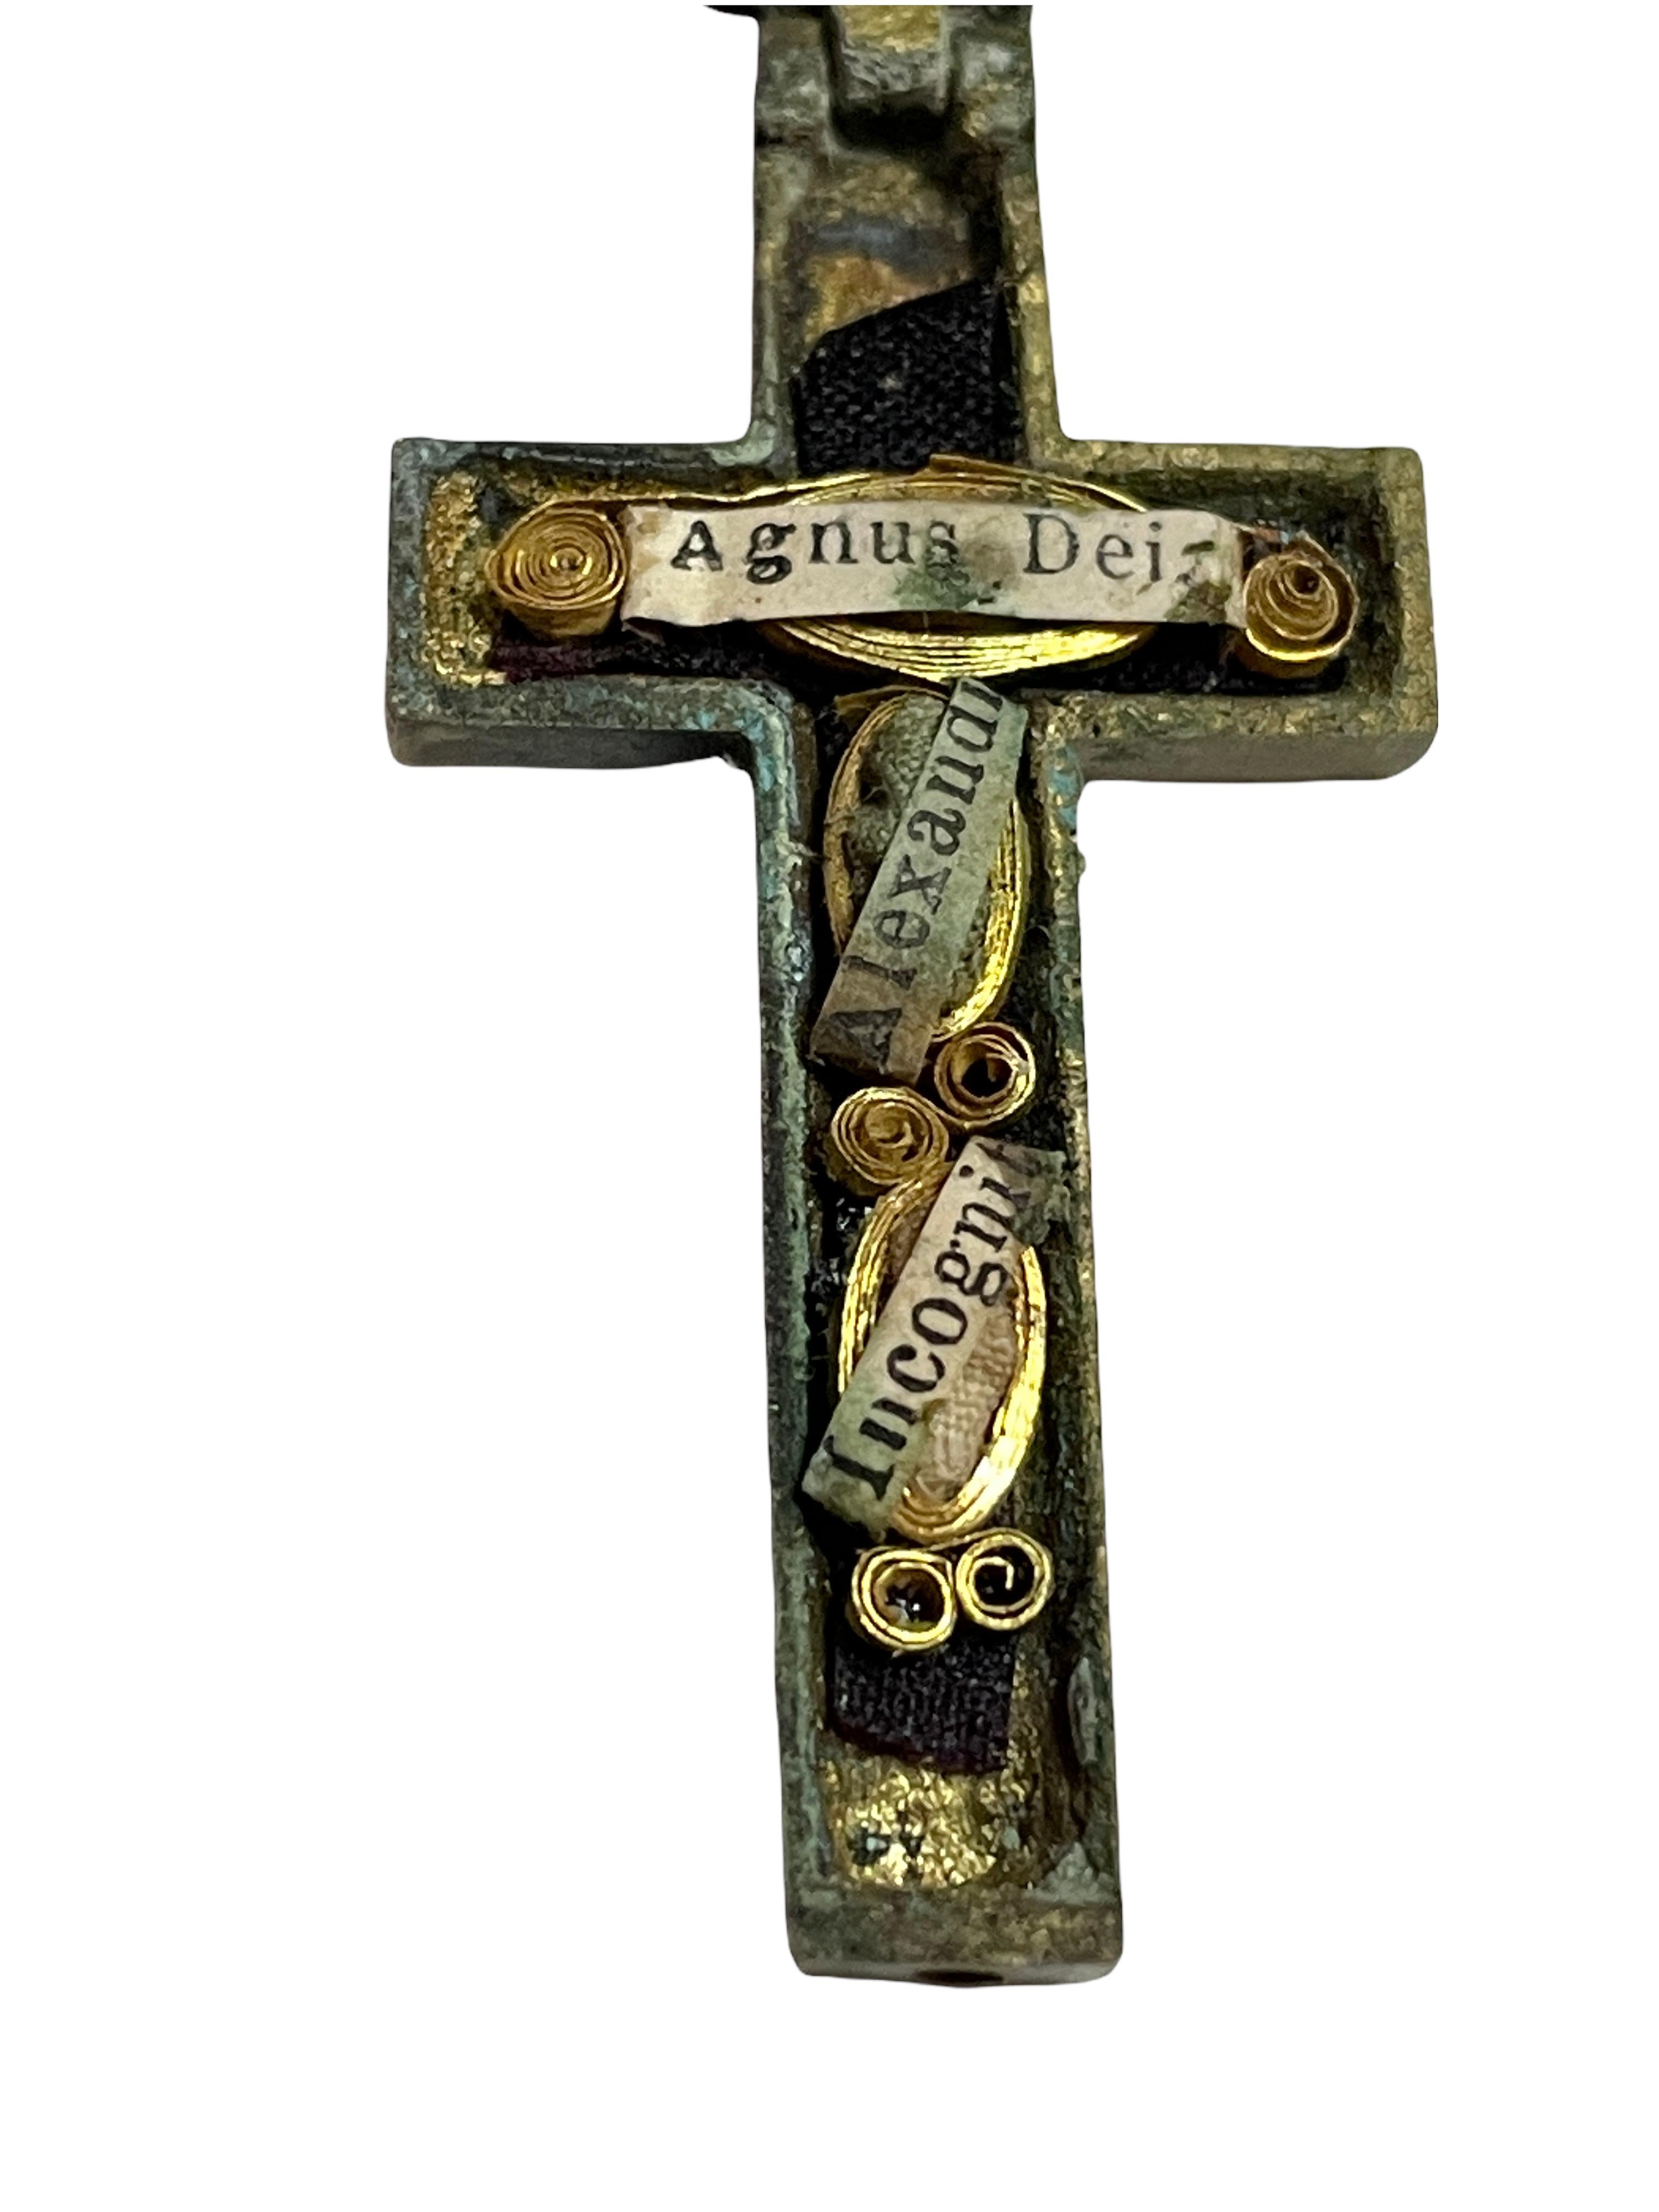 Early 20th Century Antique Catholic Reliquary Box Crucifix Pendant with Relics of Saint Catherine